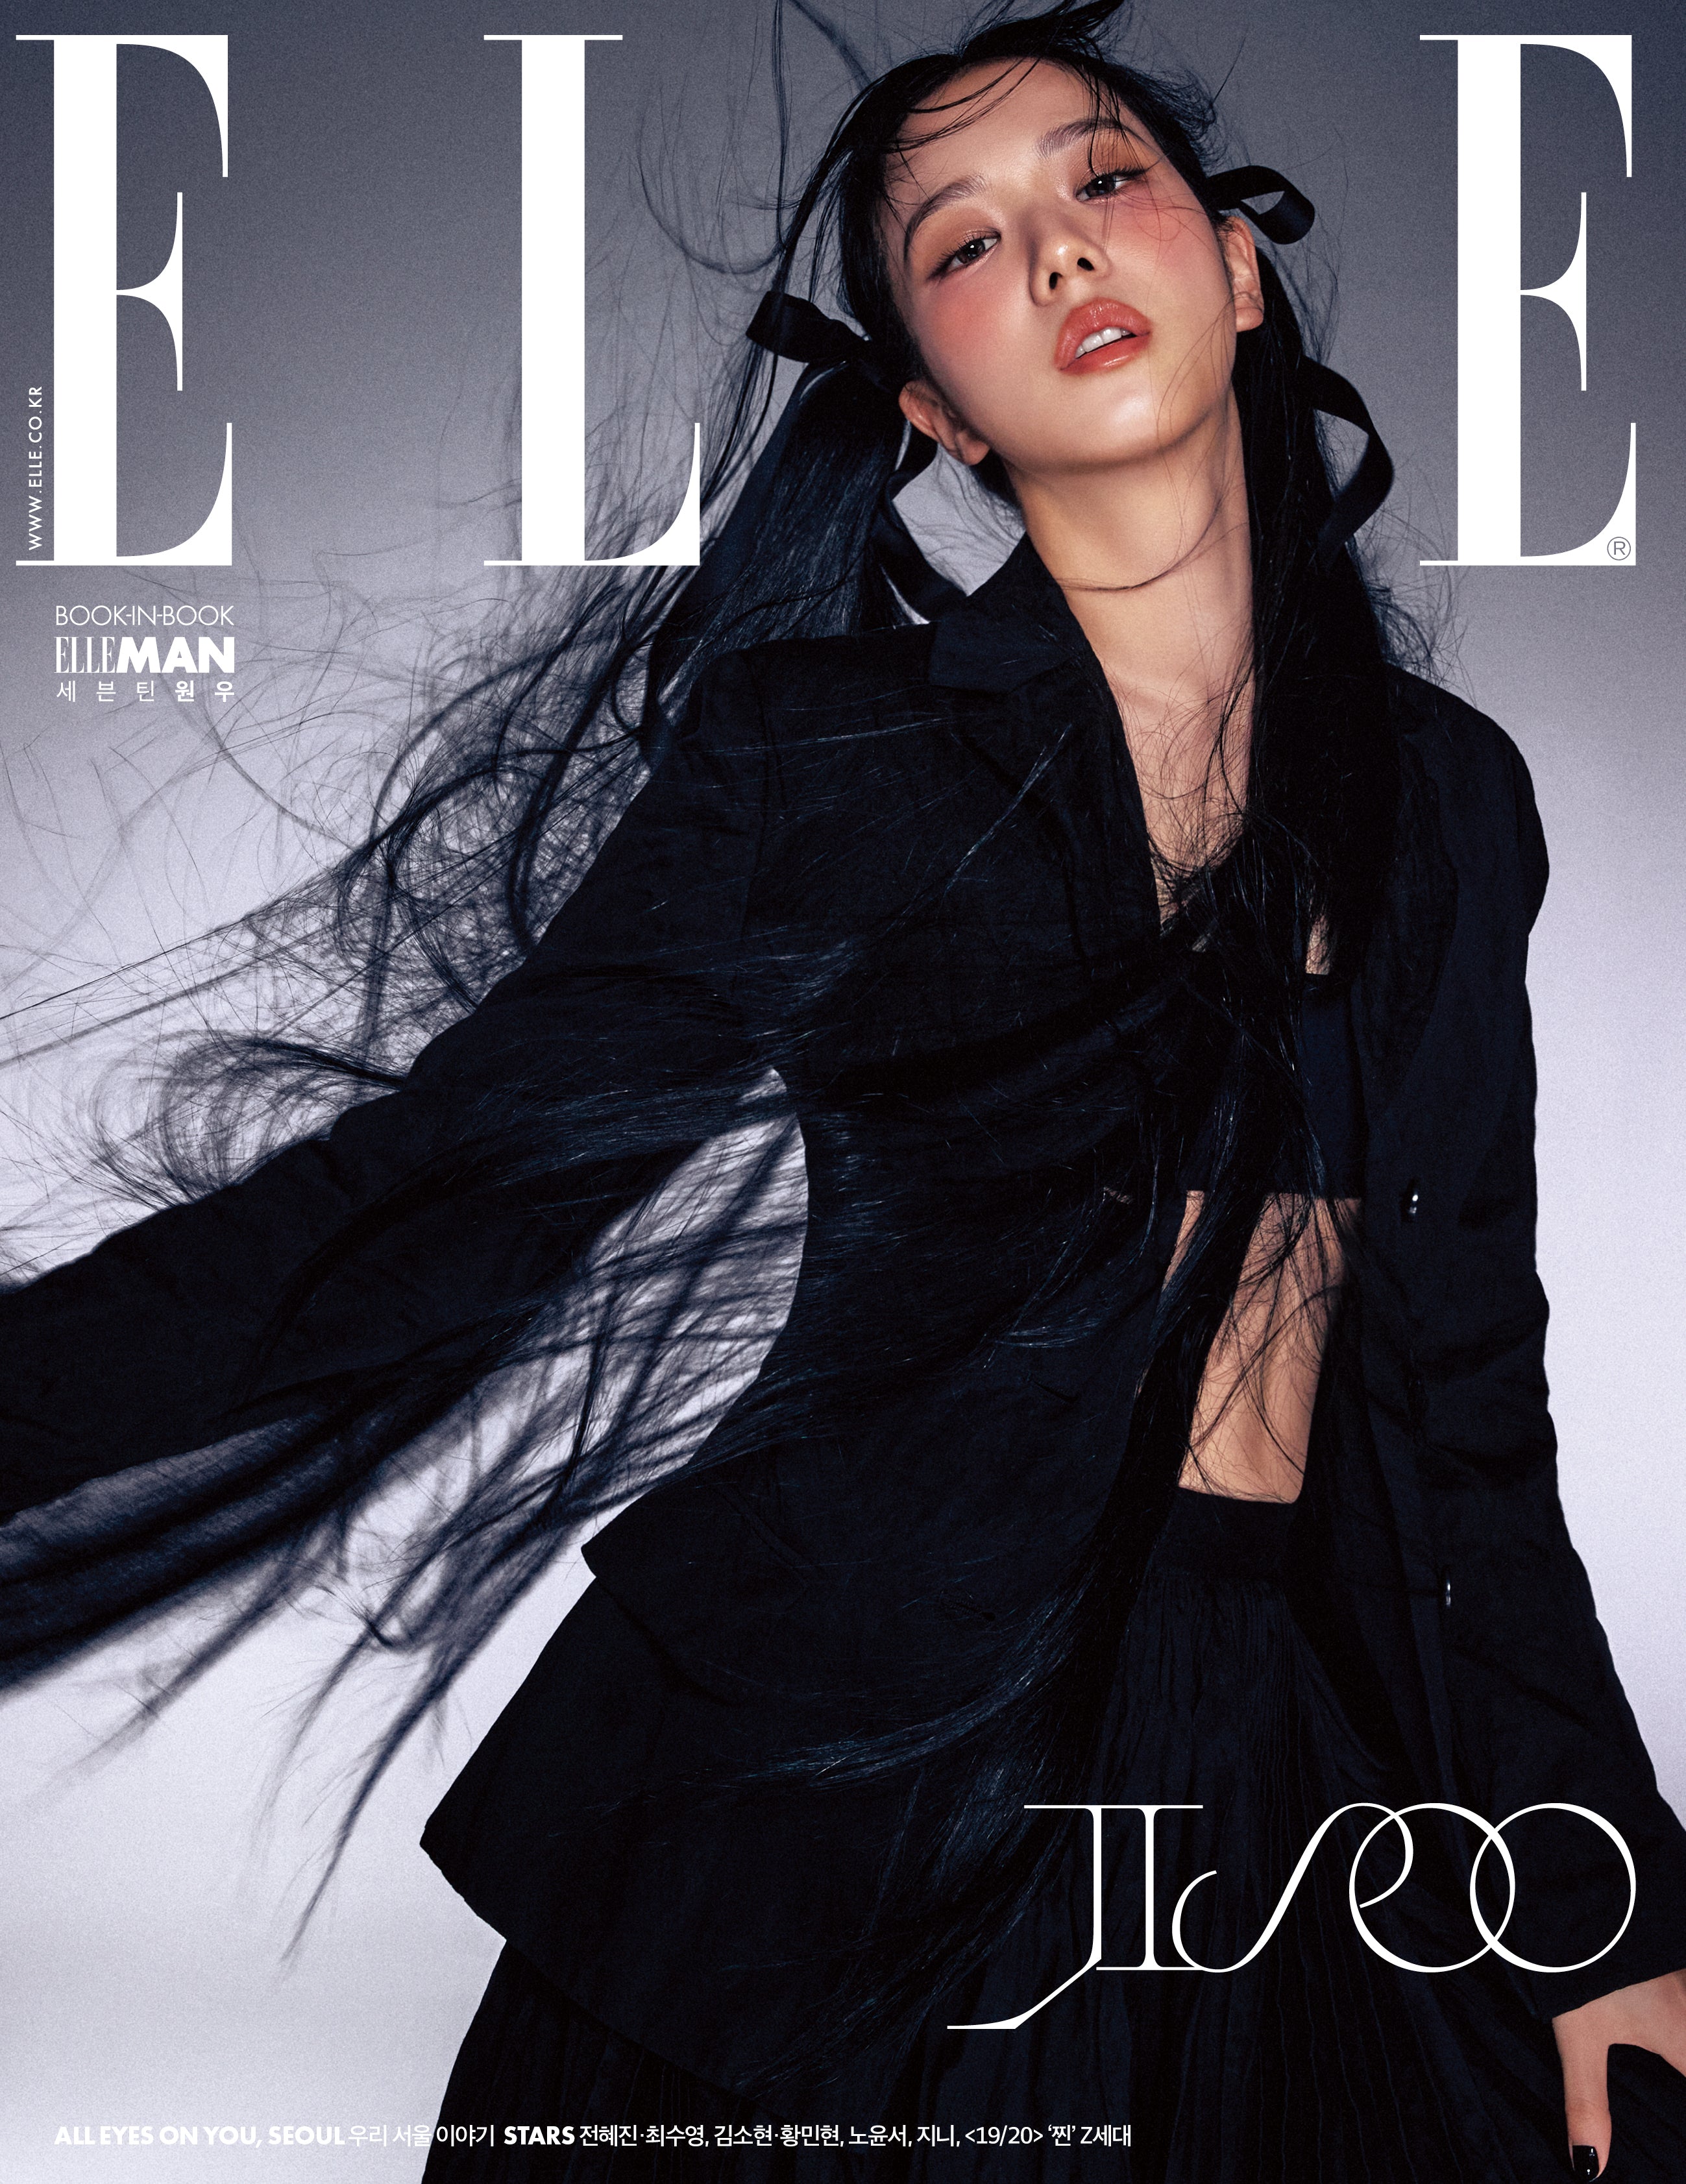 ELLE Magazine (US) on X: BLACKPINK in your area and on the cover